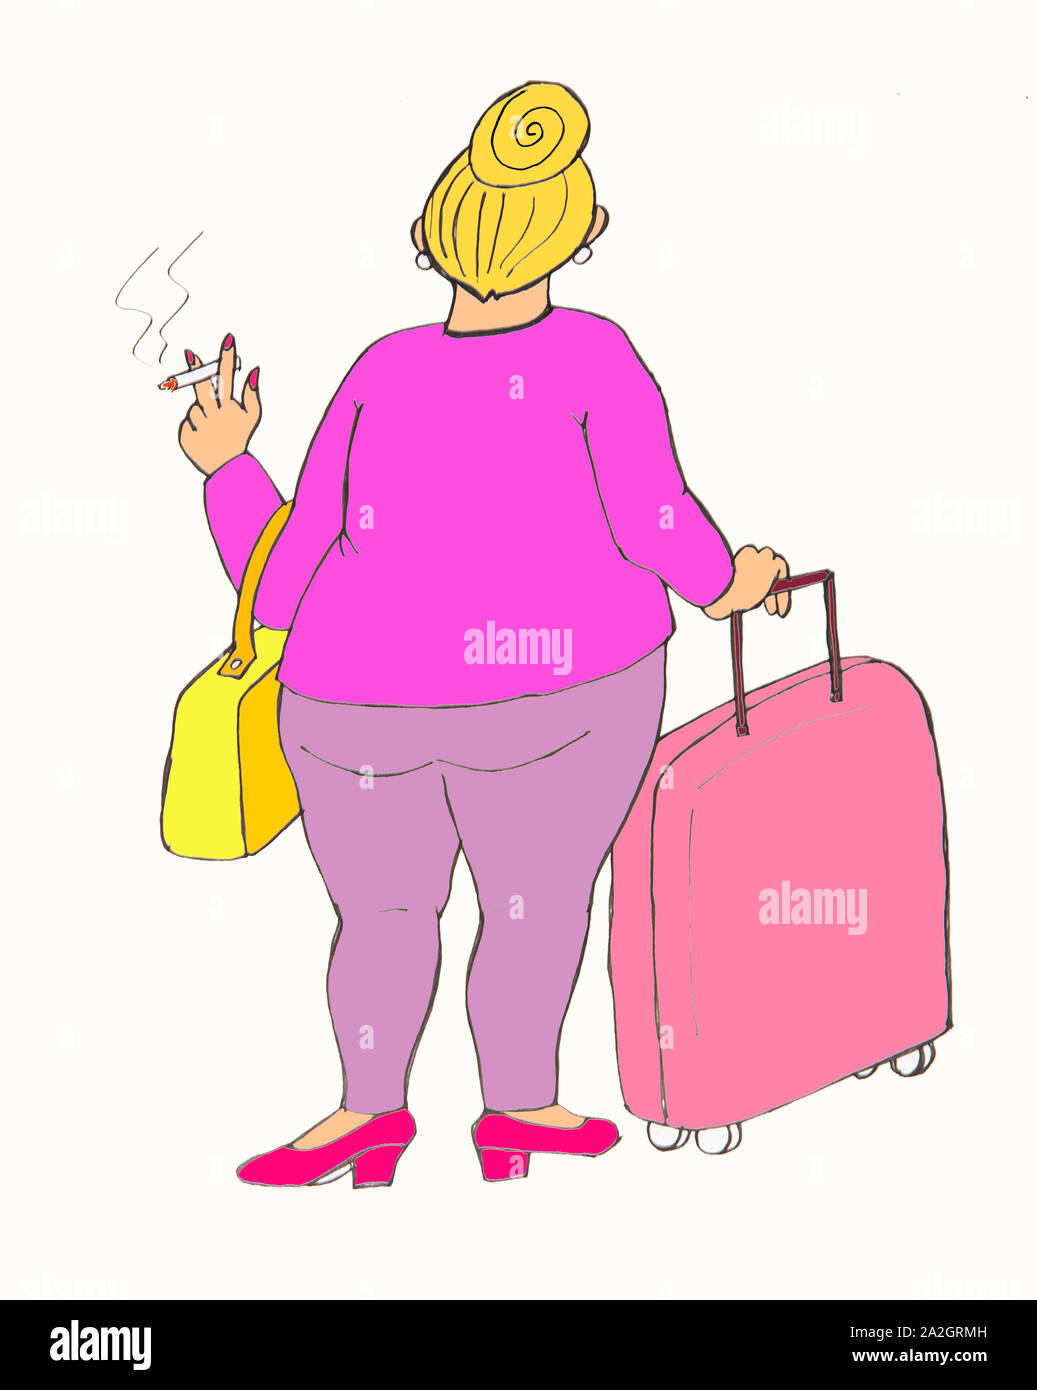 Fat woman wearing pink with pink suitcase and smoking a cigarette. Illustration. Stock Photo